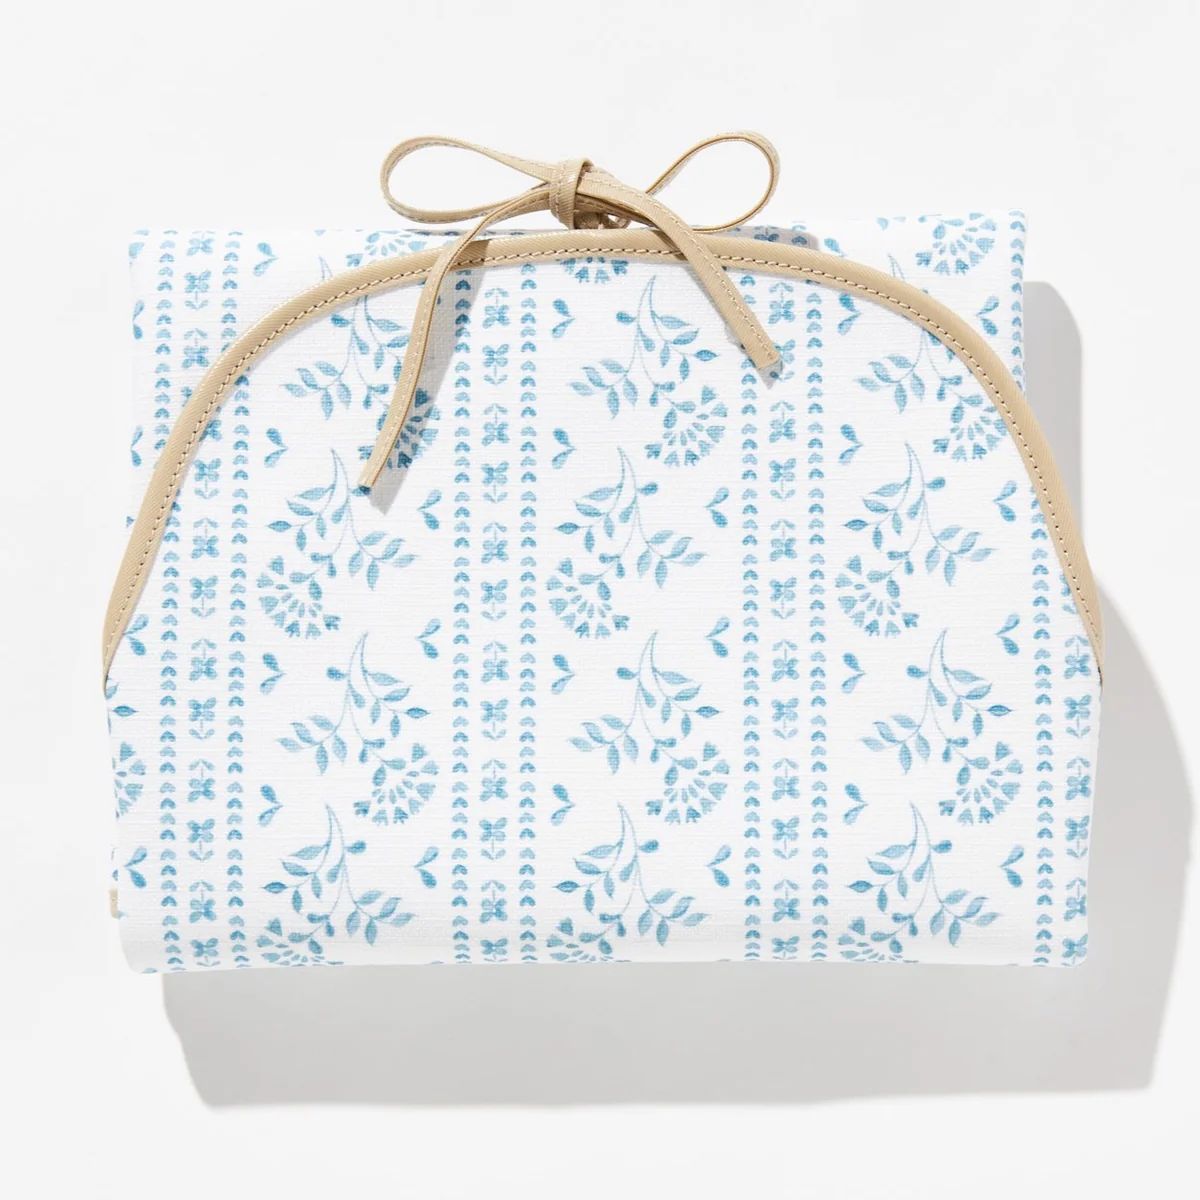 Changing Pad - Blue Floral Stripe | Dondolo